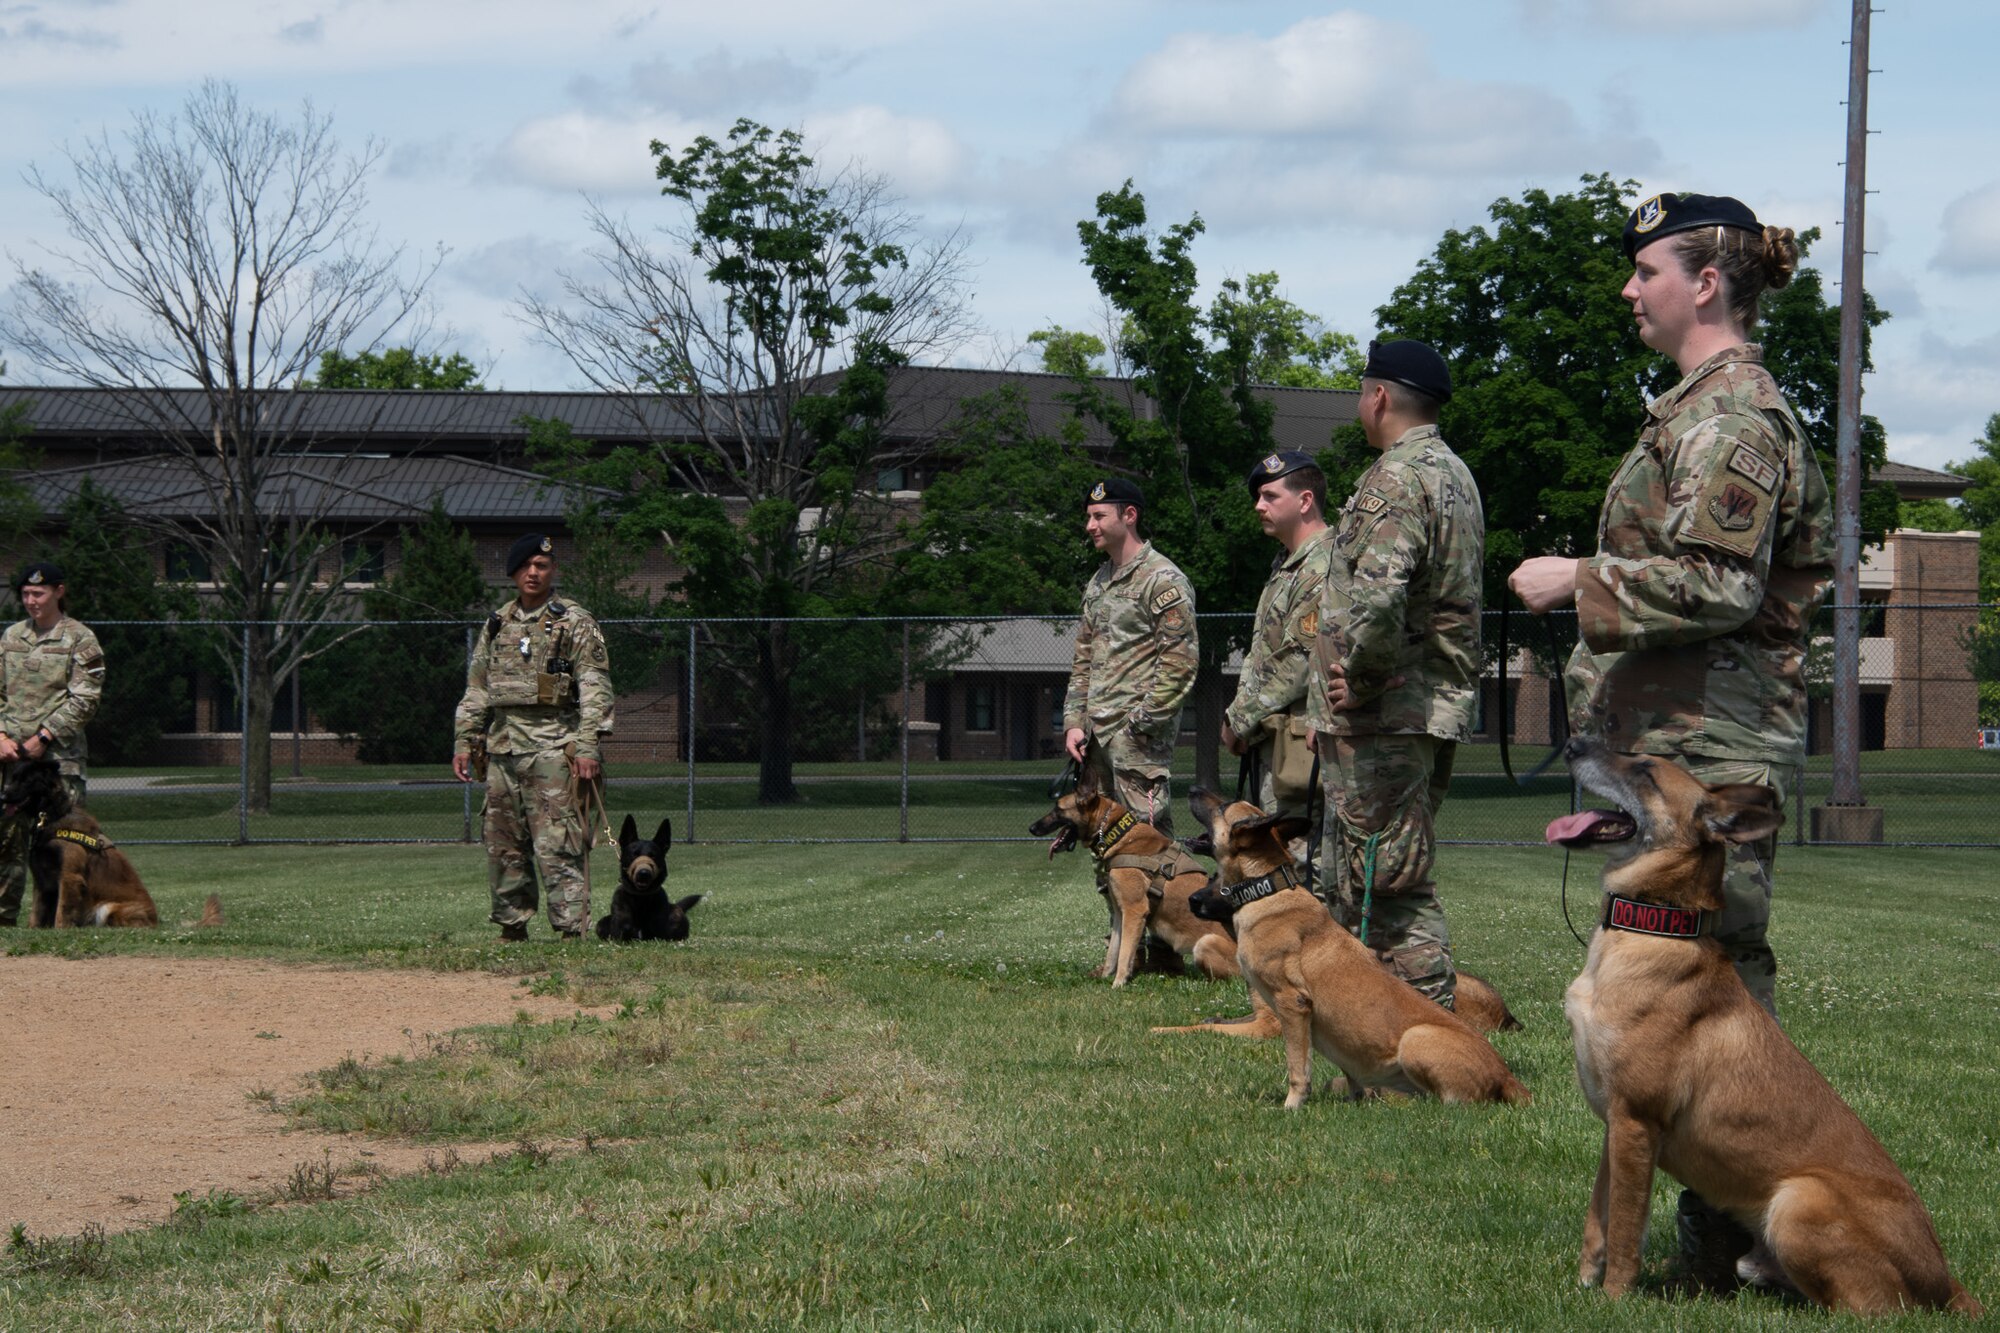 Military members in uniform stand with dogs in a field.